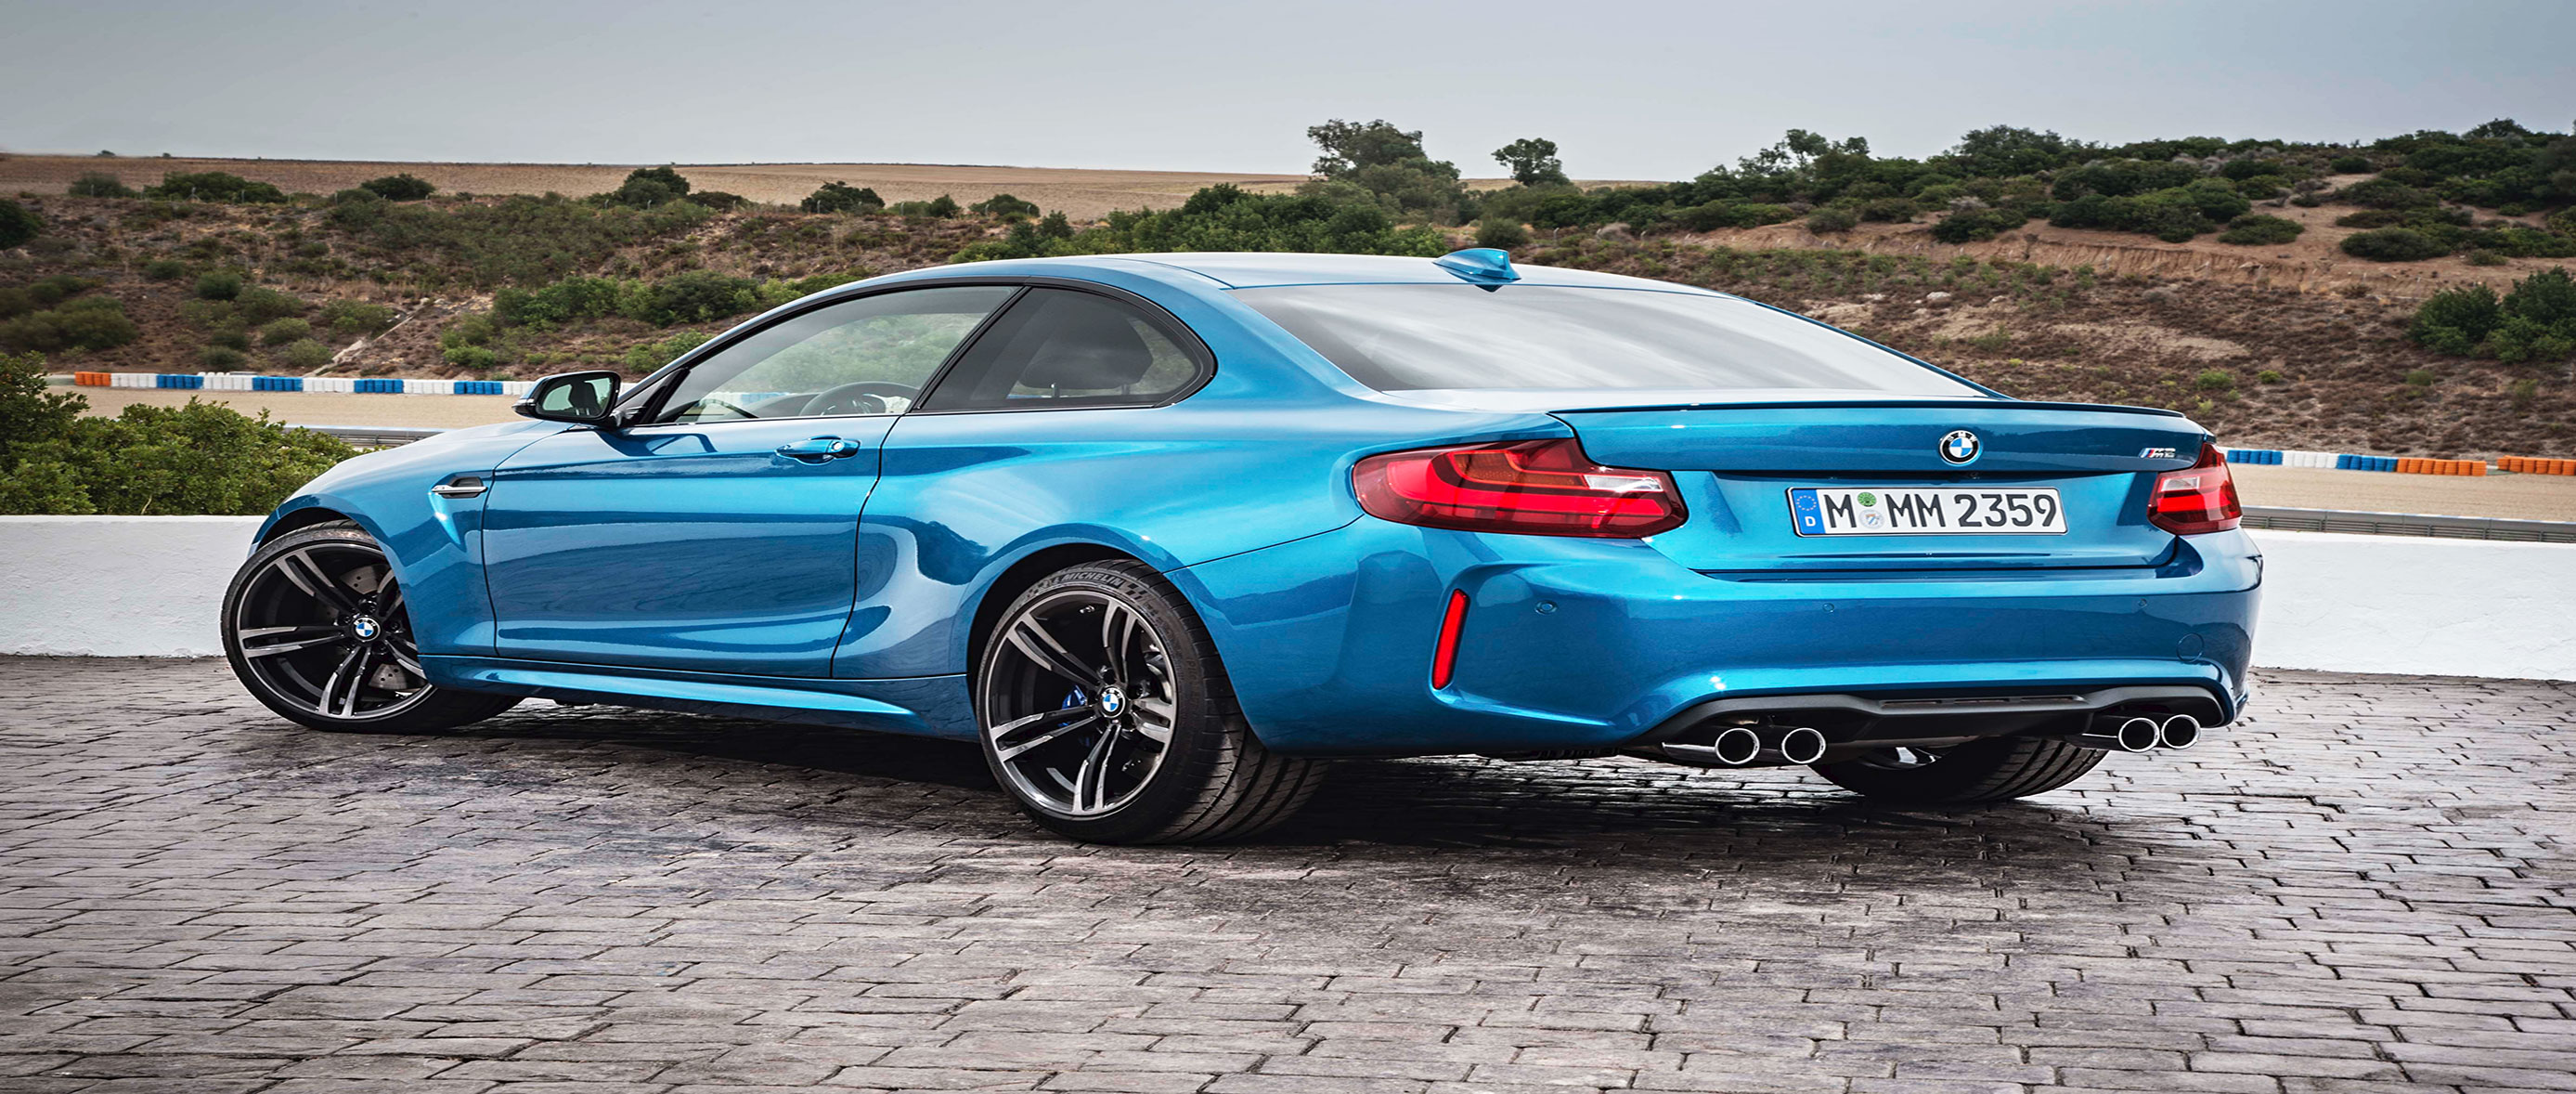 2016 BMW M2 Coupe: Be Impactful